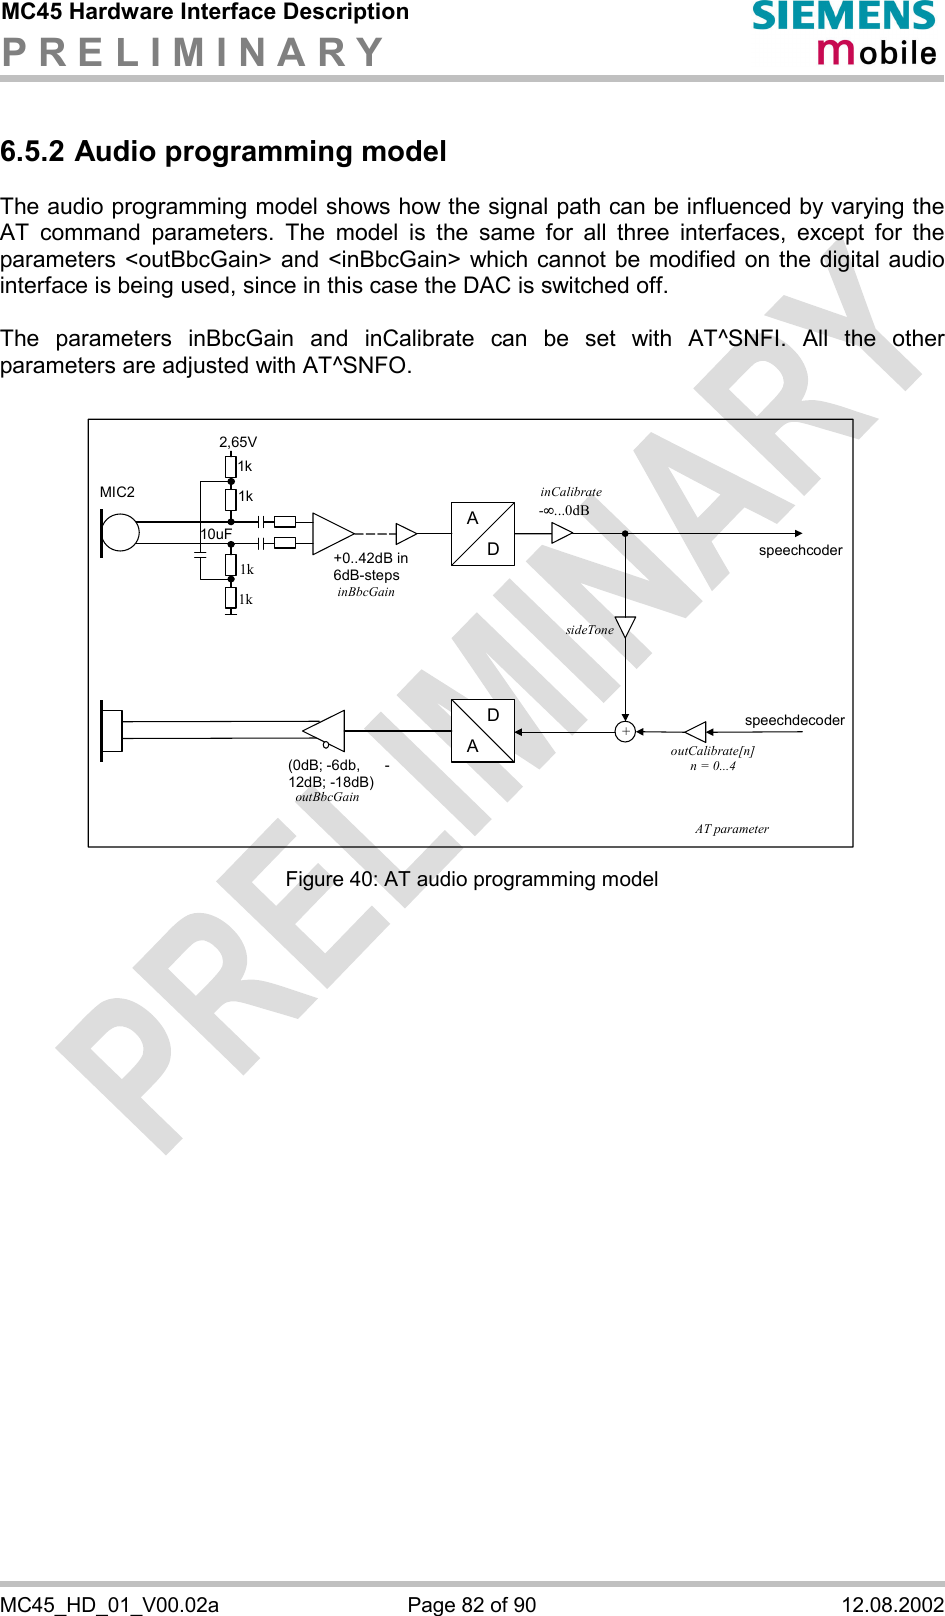 MC45 Hardware Interface Description P R E L I M I N A R Y      MC45_HD_01_V00.02a  Page 82 of 90  12.08.2002 6.5.2 Audio programming model The audio programming model shows how the signal path can be influenced by varying the AT command parameters. The model is the same for all three interfaces, except for the parameters &lt;outBbcGain&gt; and &lt;inBbcGain&gt; which cannot be modified on the digital audio interface is being used, since in this case the DAC is switched off.  The parameters inBbcGain and inCalibrate can be set with AT^SNFI. All the other parameters are adjusted with AT^SNFO.   ADAD-¥...0dB speechcoder (0dB; -6db,      -12dB; -18dB) +0..42dB in 6dB-steps1k 1k 1k 1k 2,65V 10uF+ sideTone AT parameter outCalibrate[n] n = 0...4 inCalibrate inBbcGain outBbcGain speechdecoder MIC2  Figure 40: AT audio programming model 